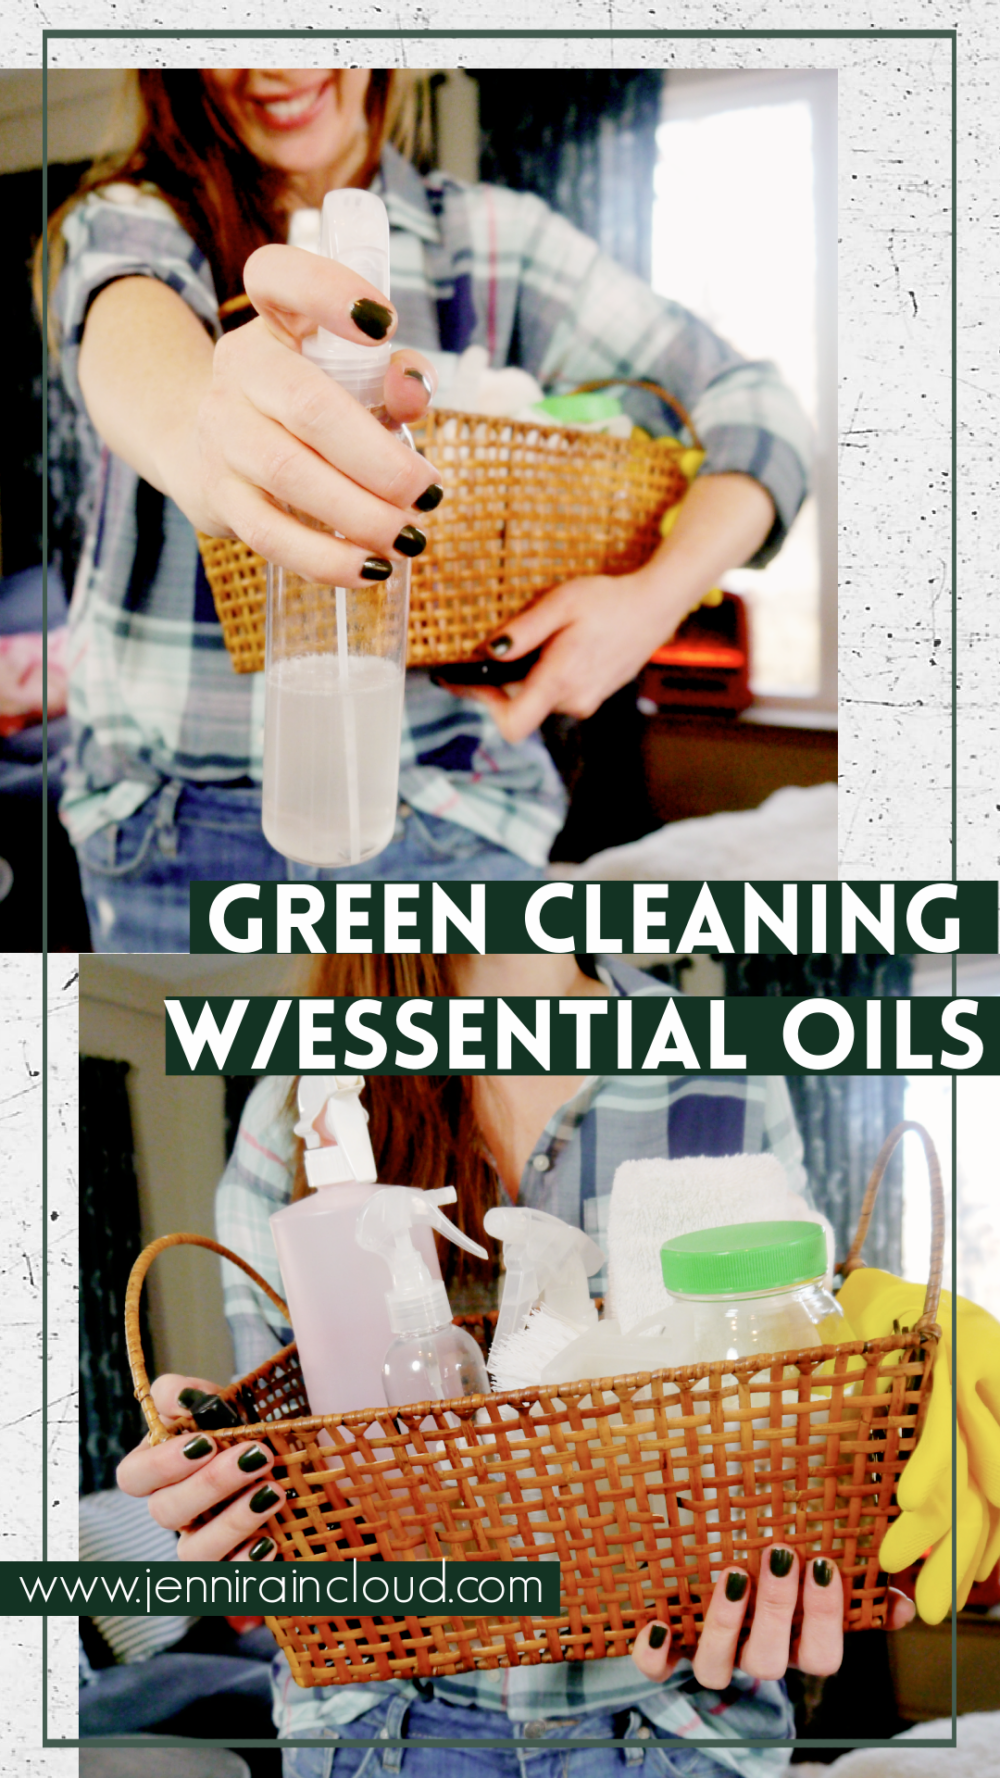 Green Cleaning with Essential Oils